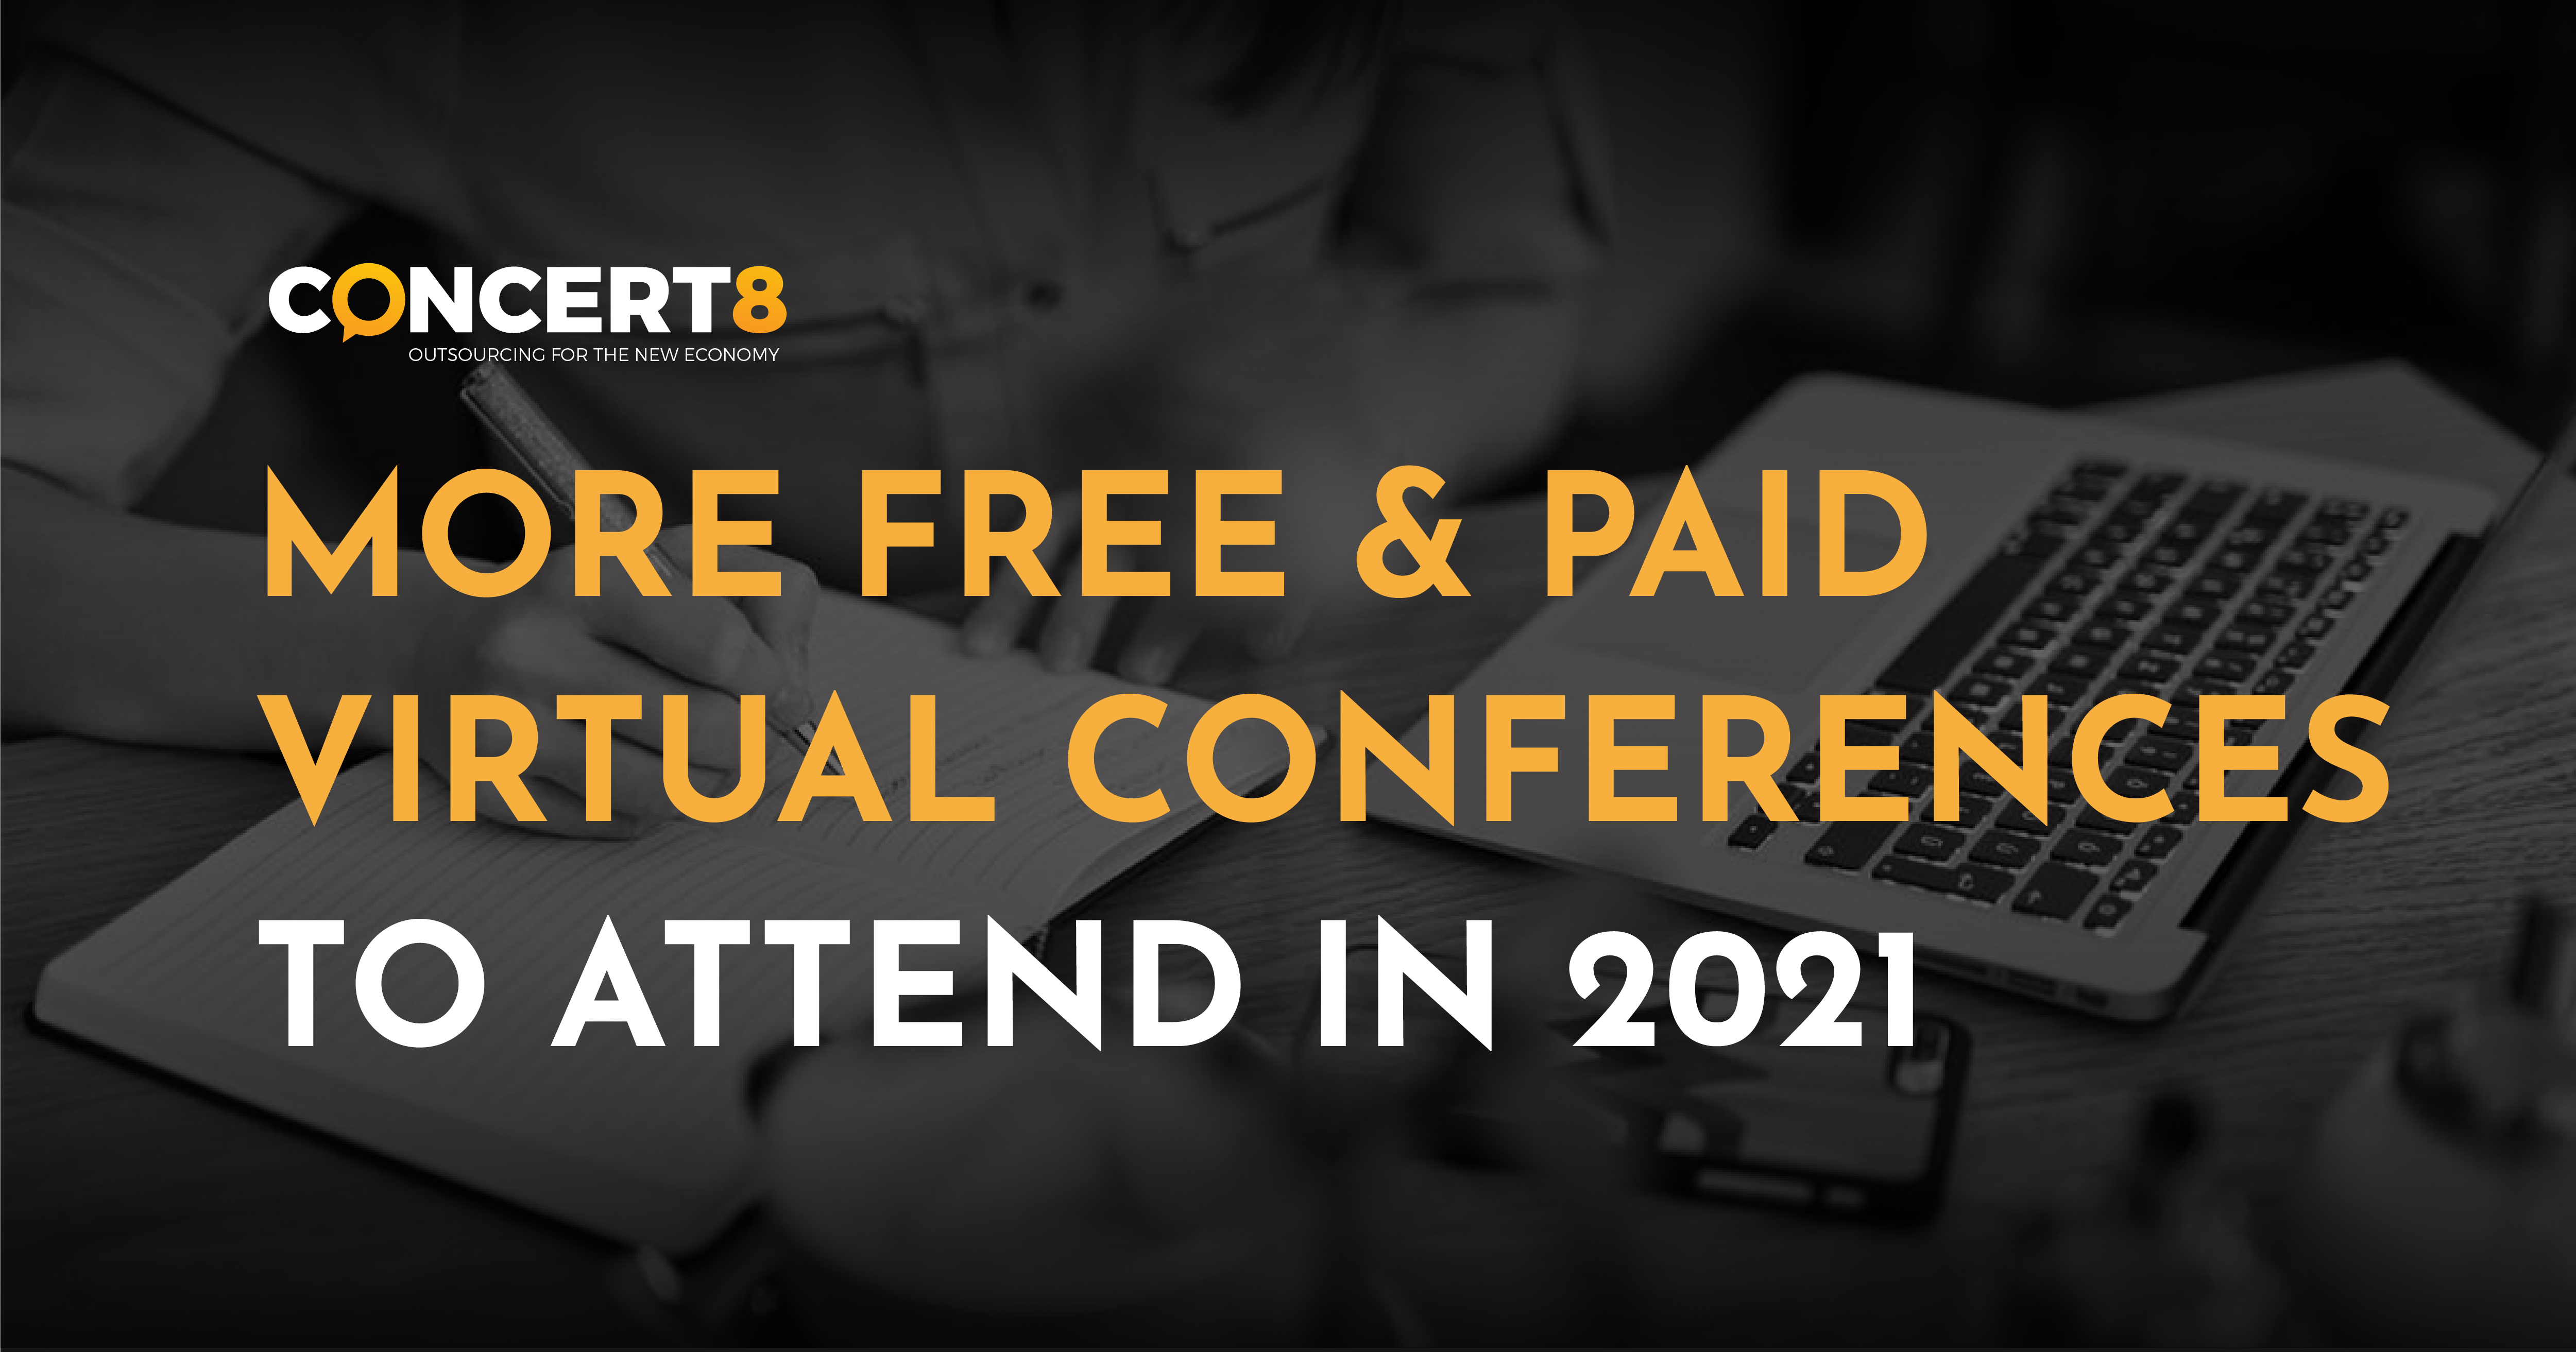 More Free & Paid Virtual Conferences to Attend in 2021 Concert8